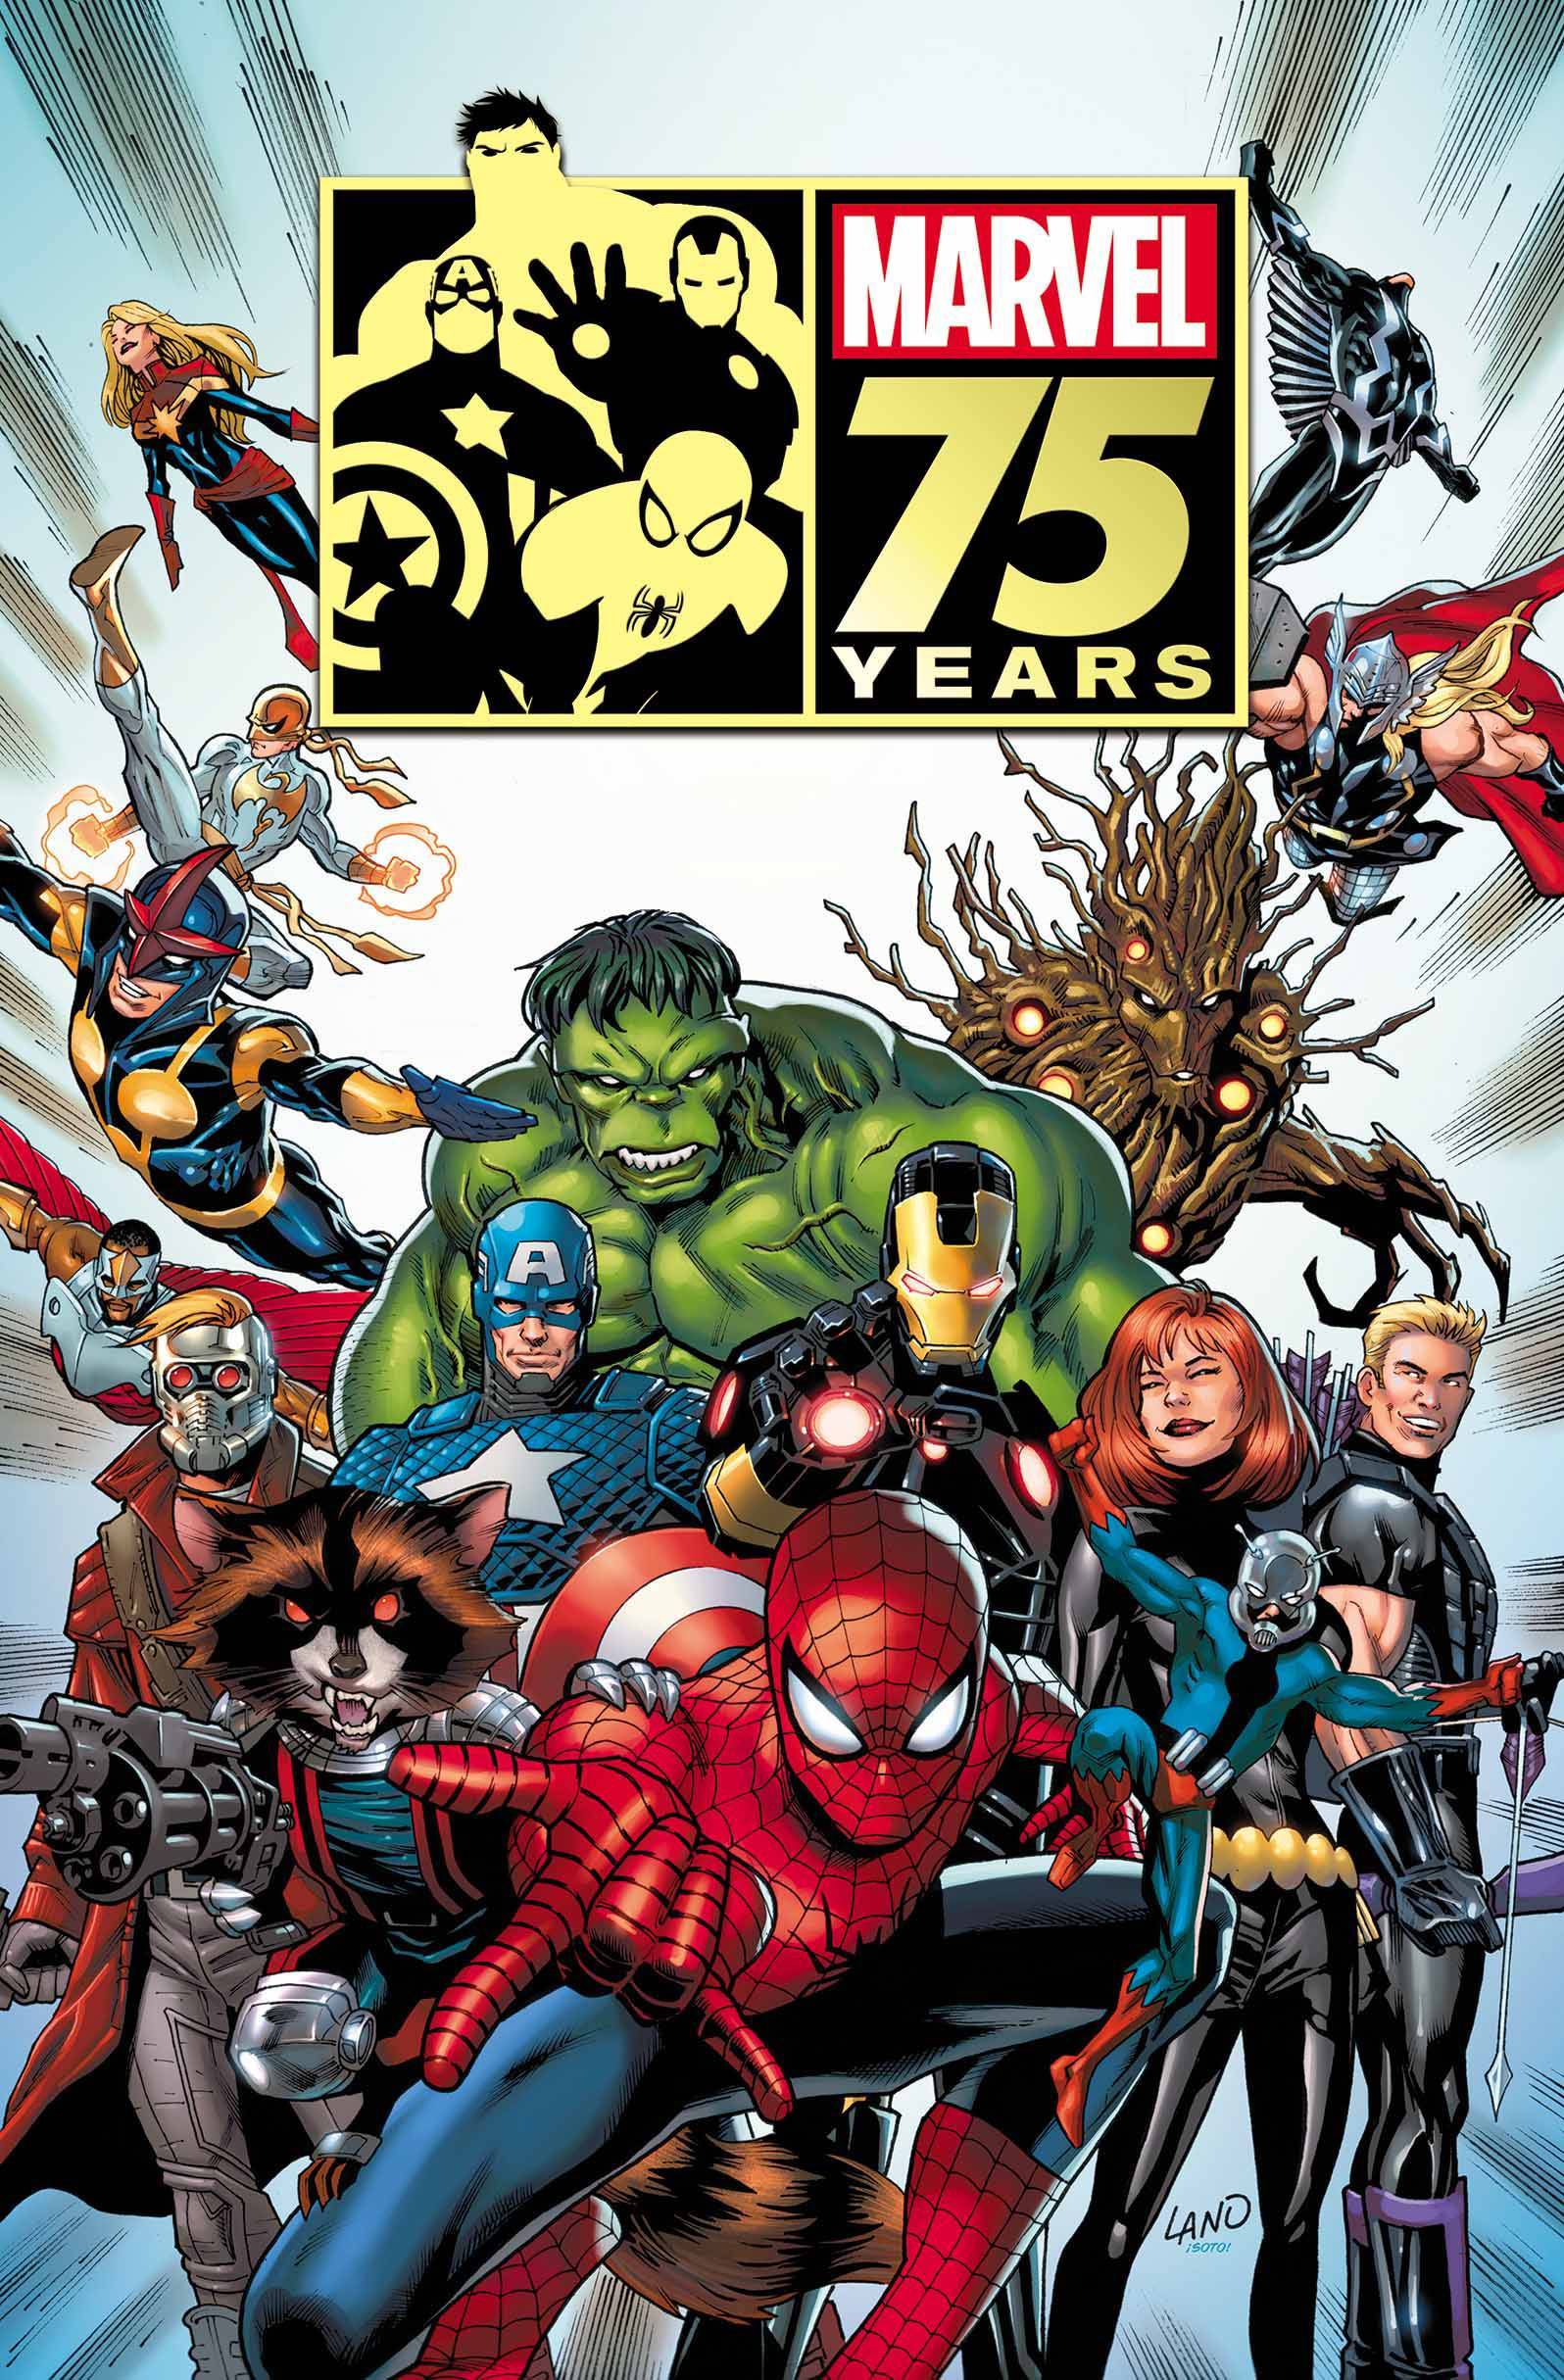 Amazoncom: Marvel: 75 Years, From Pulp to Pop!